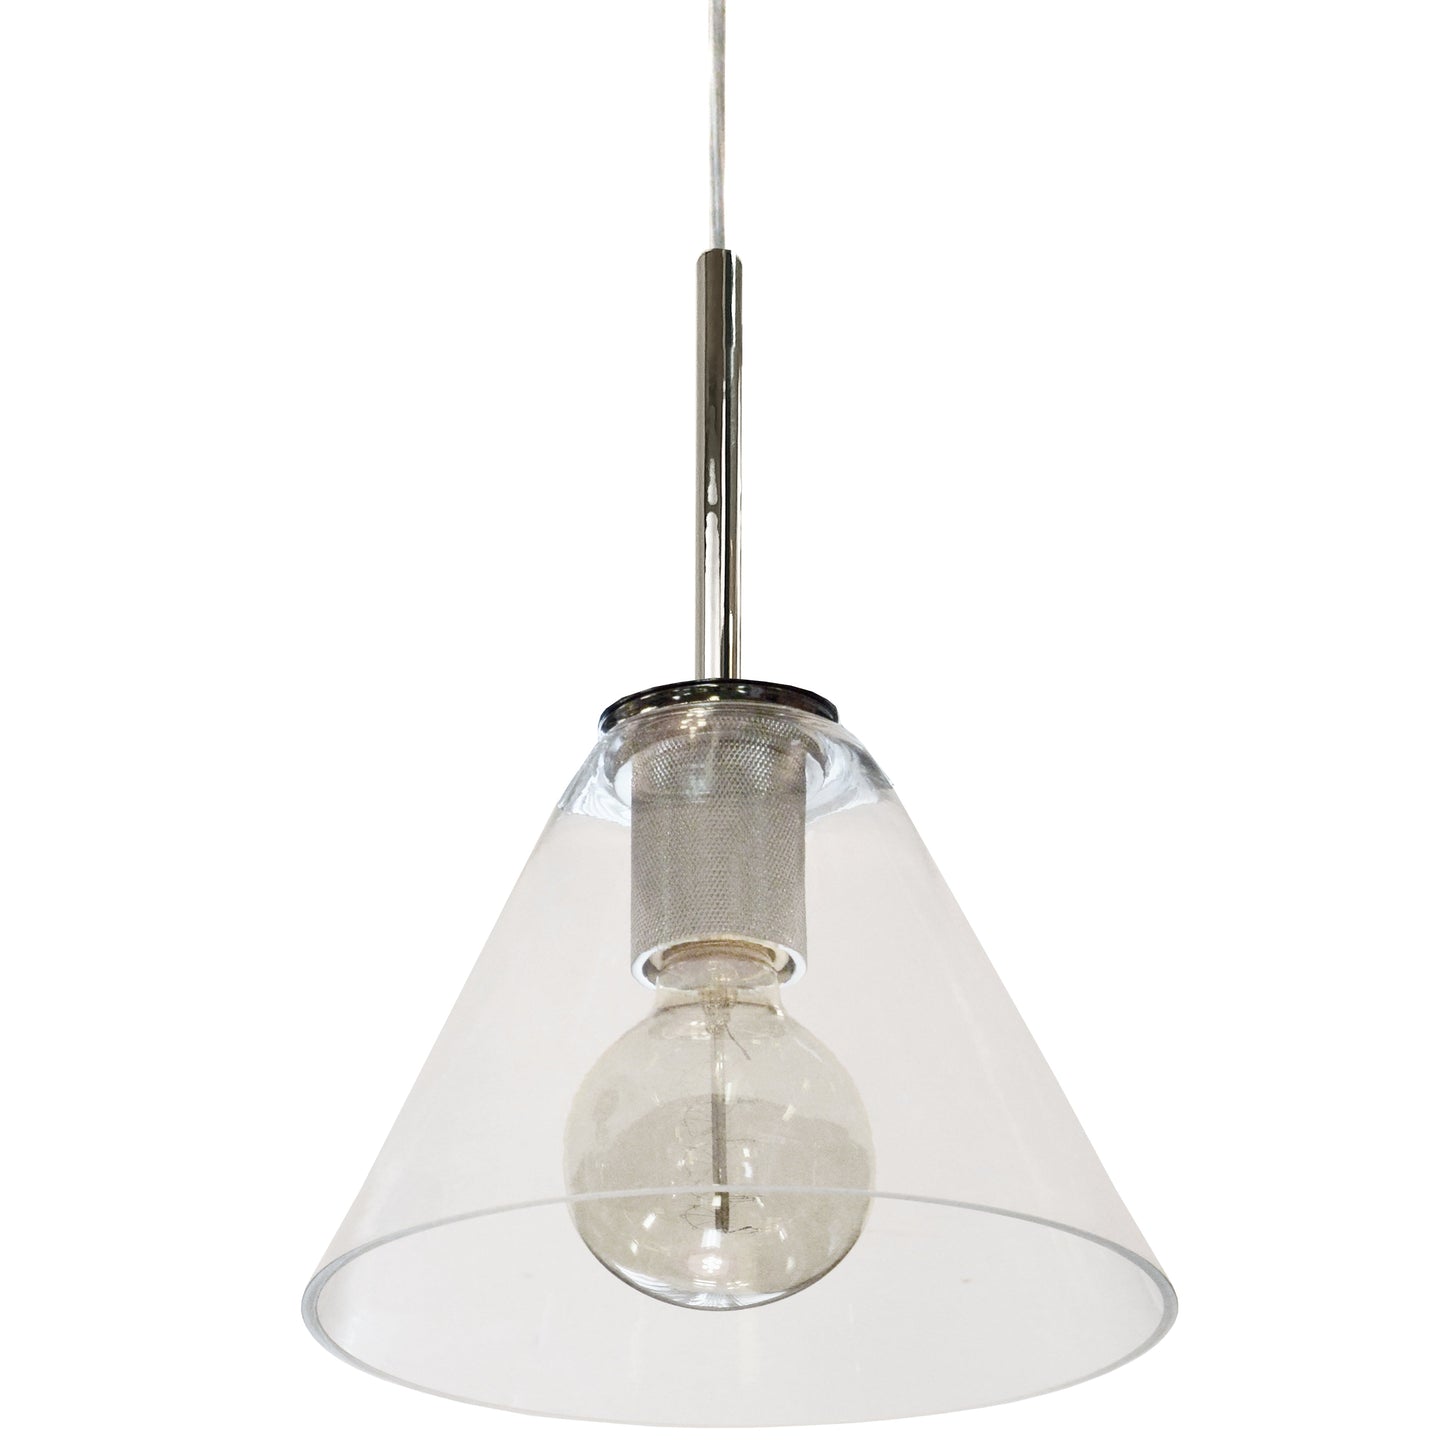 Dainolite 1 Light Incandescent Pendant, Polished Chrome with Clear Glass